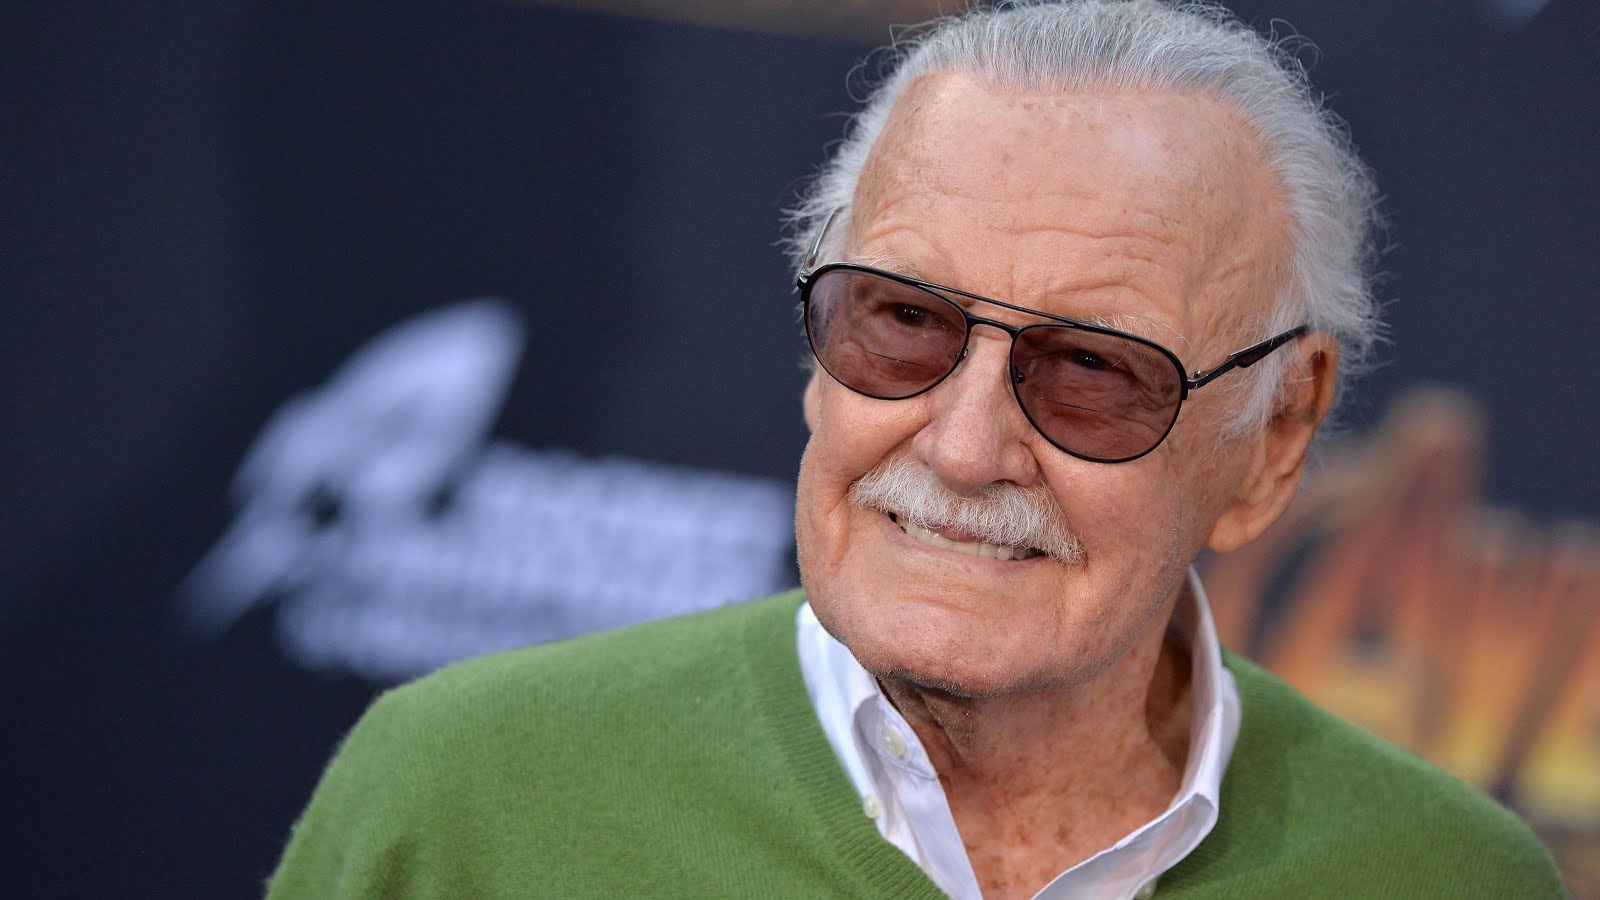 STAN LEE THE MARVEL: DEAD AT 95